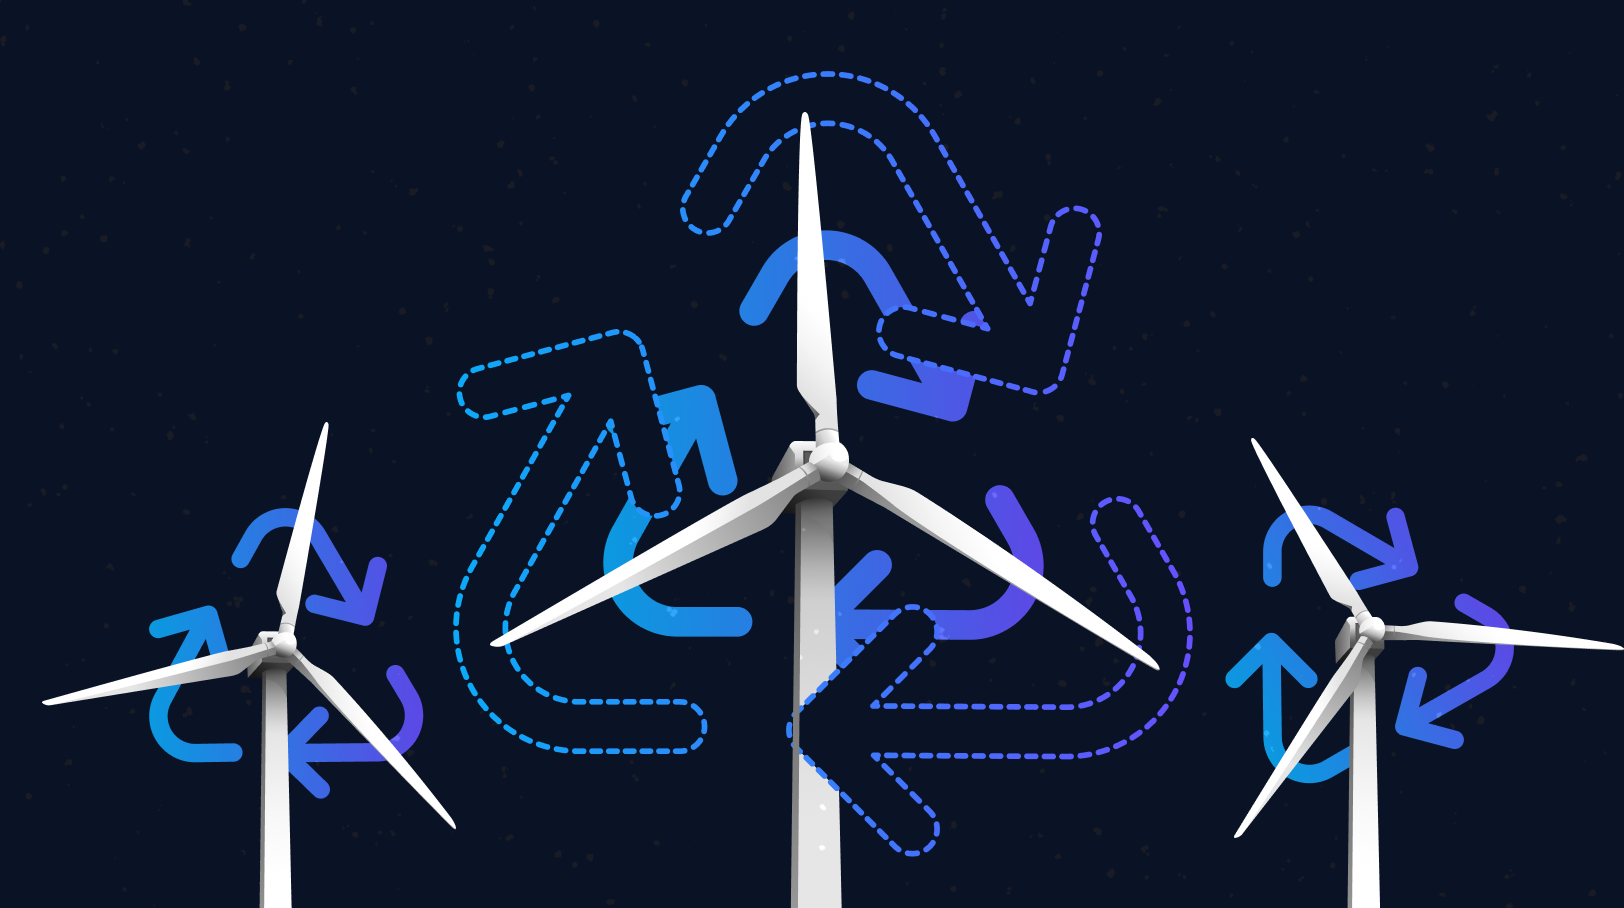 wind turbines with recycling symbols layered over them